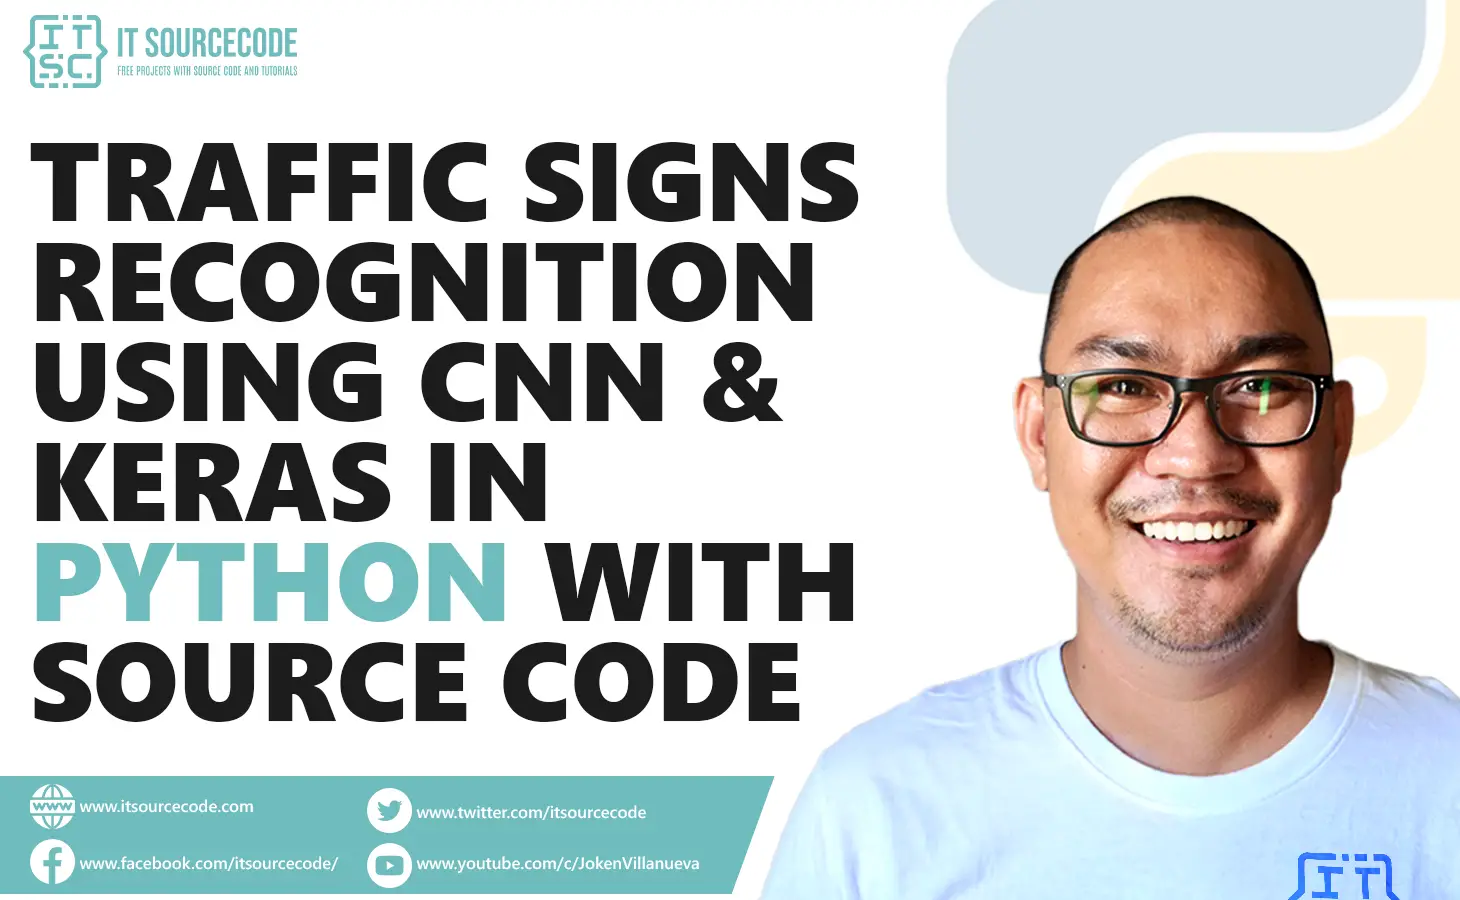 Traffic Signs Recognition Using CNN & Keras In Python With Source Code